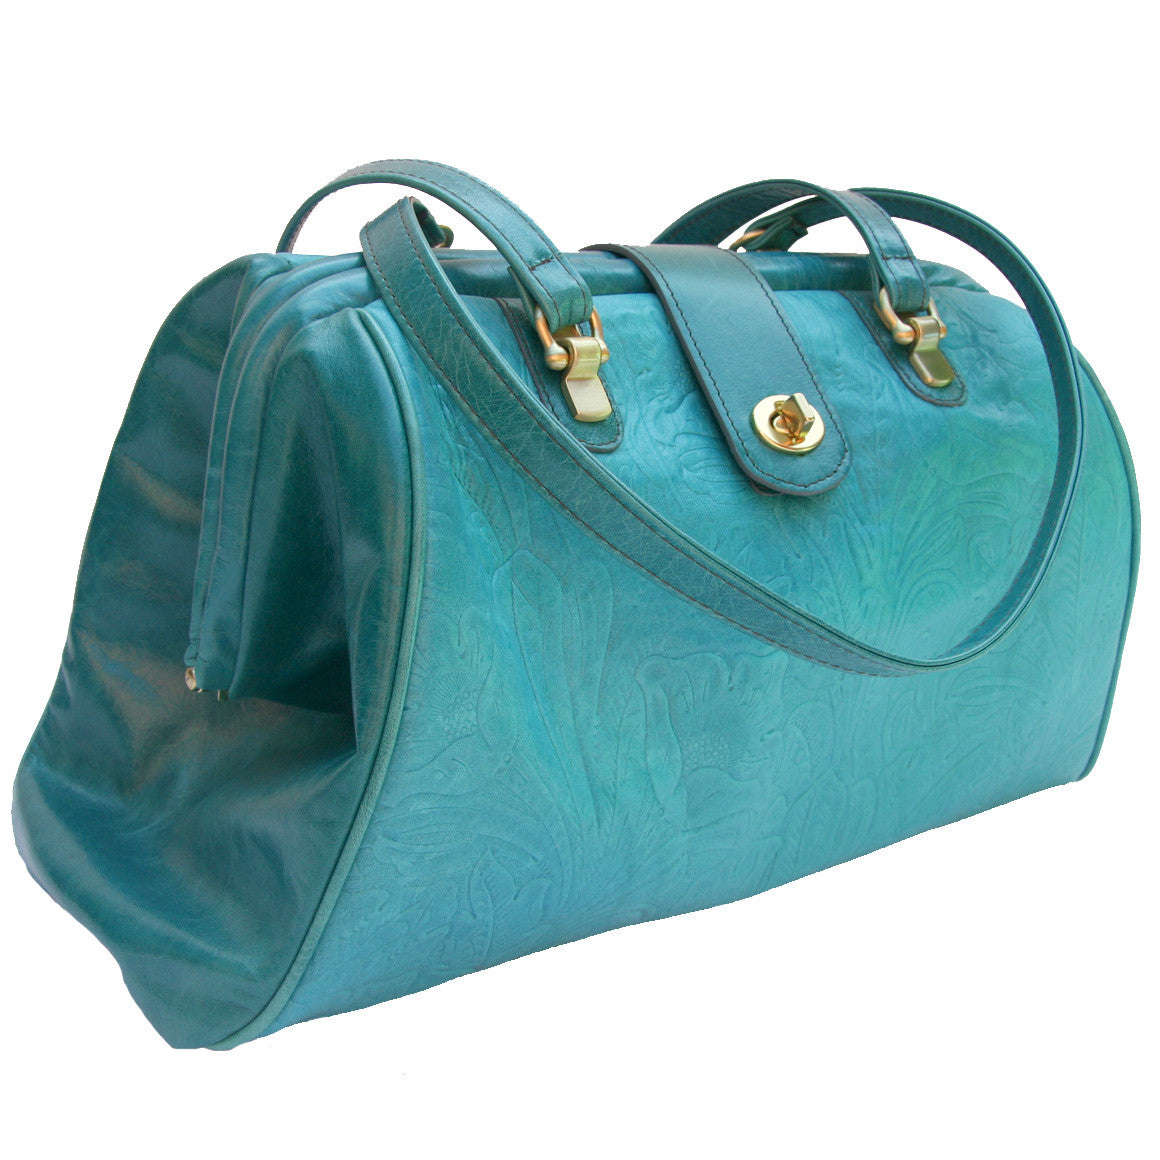 Venus Tote in Slate Leather by Sage Luxury - Offhand Designs